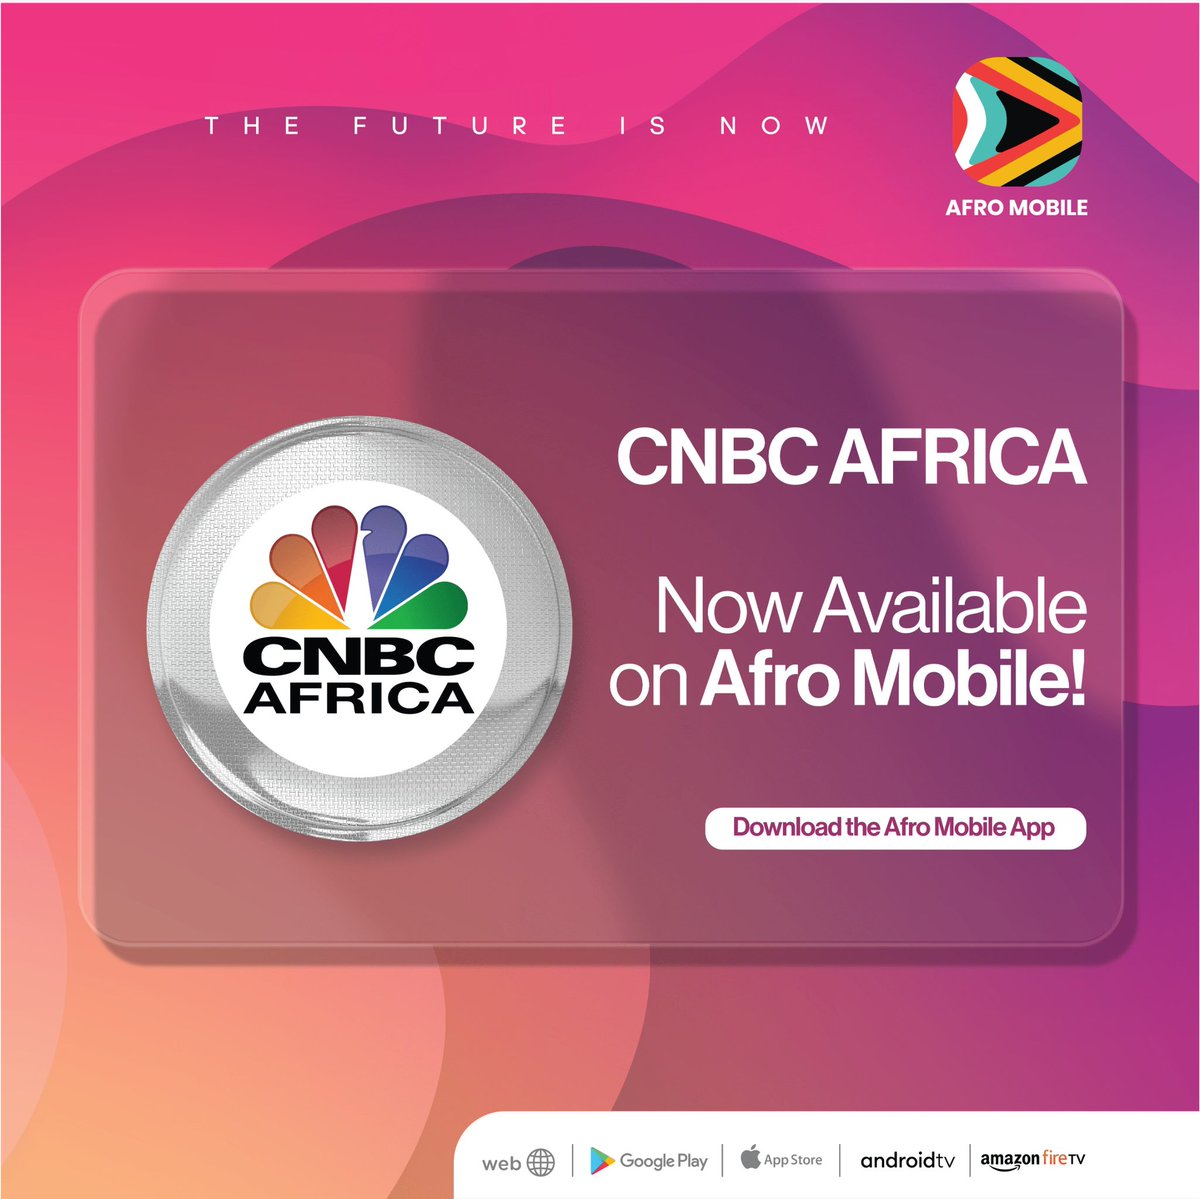 OFFICIAL: You can now watch @cnbcafrica news channel from wherever you are via Afro Mobile! Download Link: linktr.ee/afromobile #AfroMobileUG #TheFutureIsNow